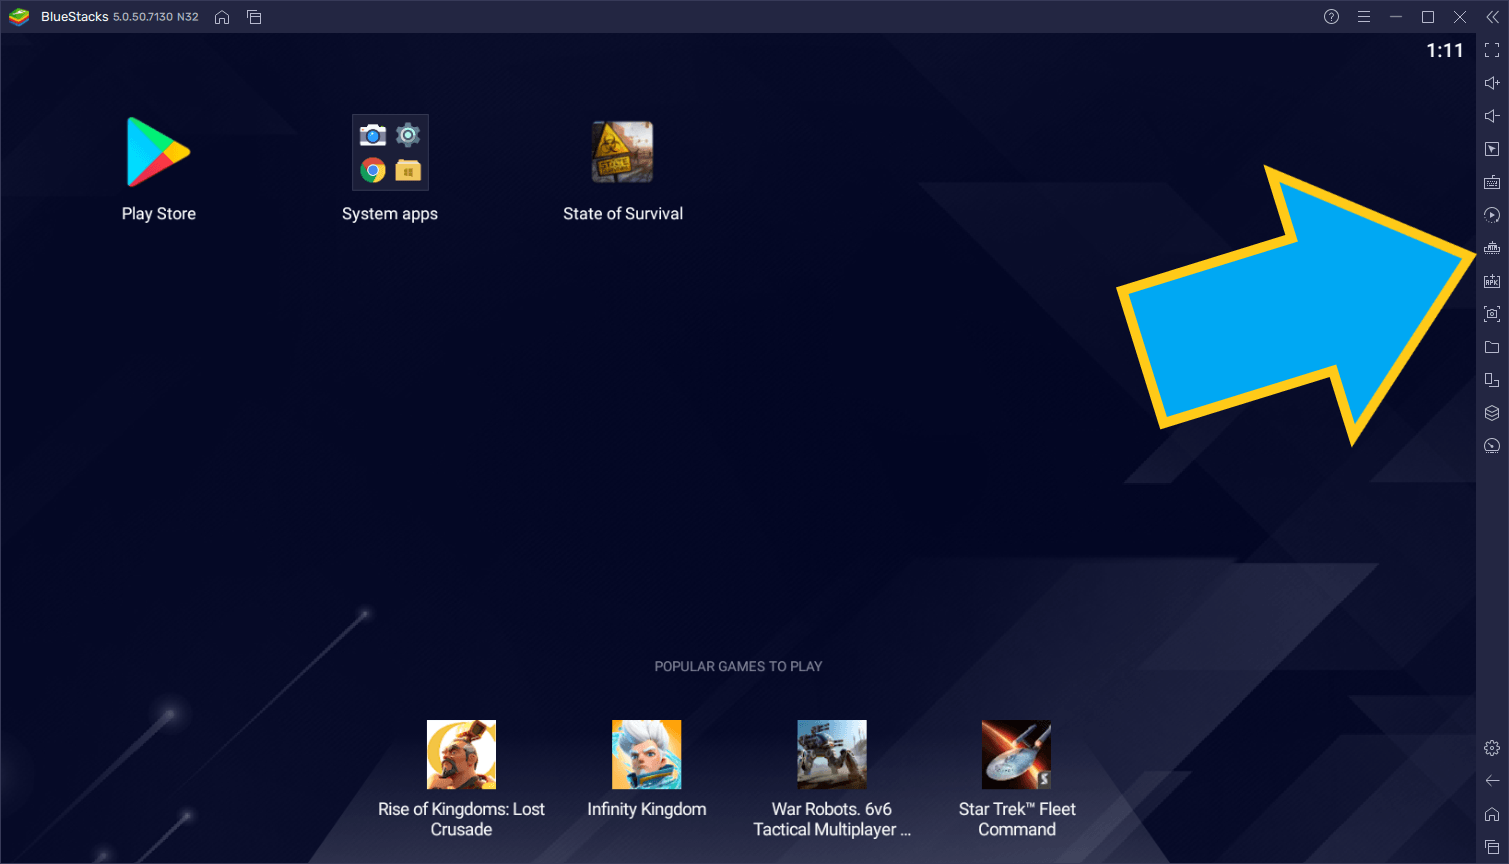 BlueStacks 5 Global Release - 7 Reasons Why You Should Try the New Version